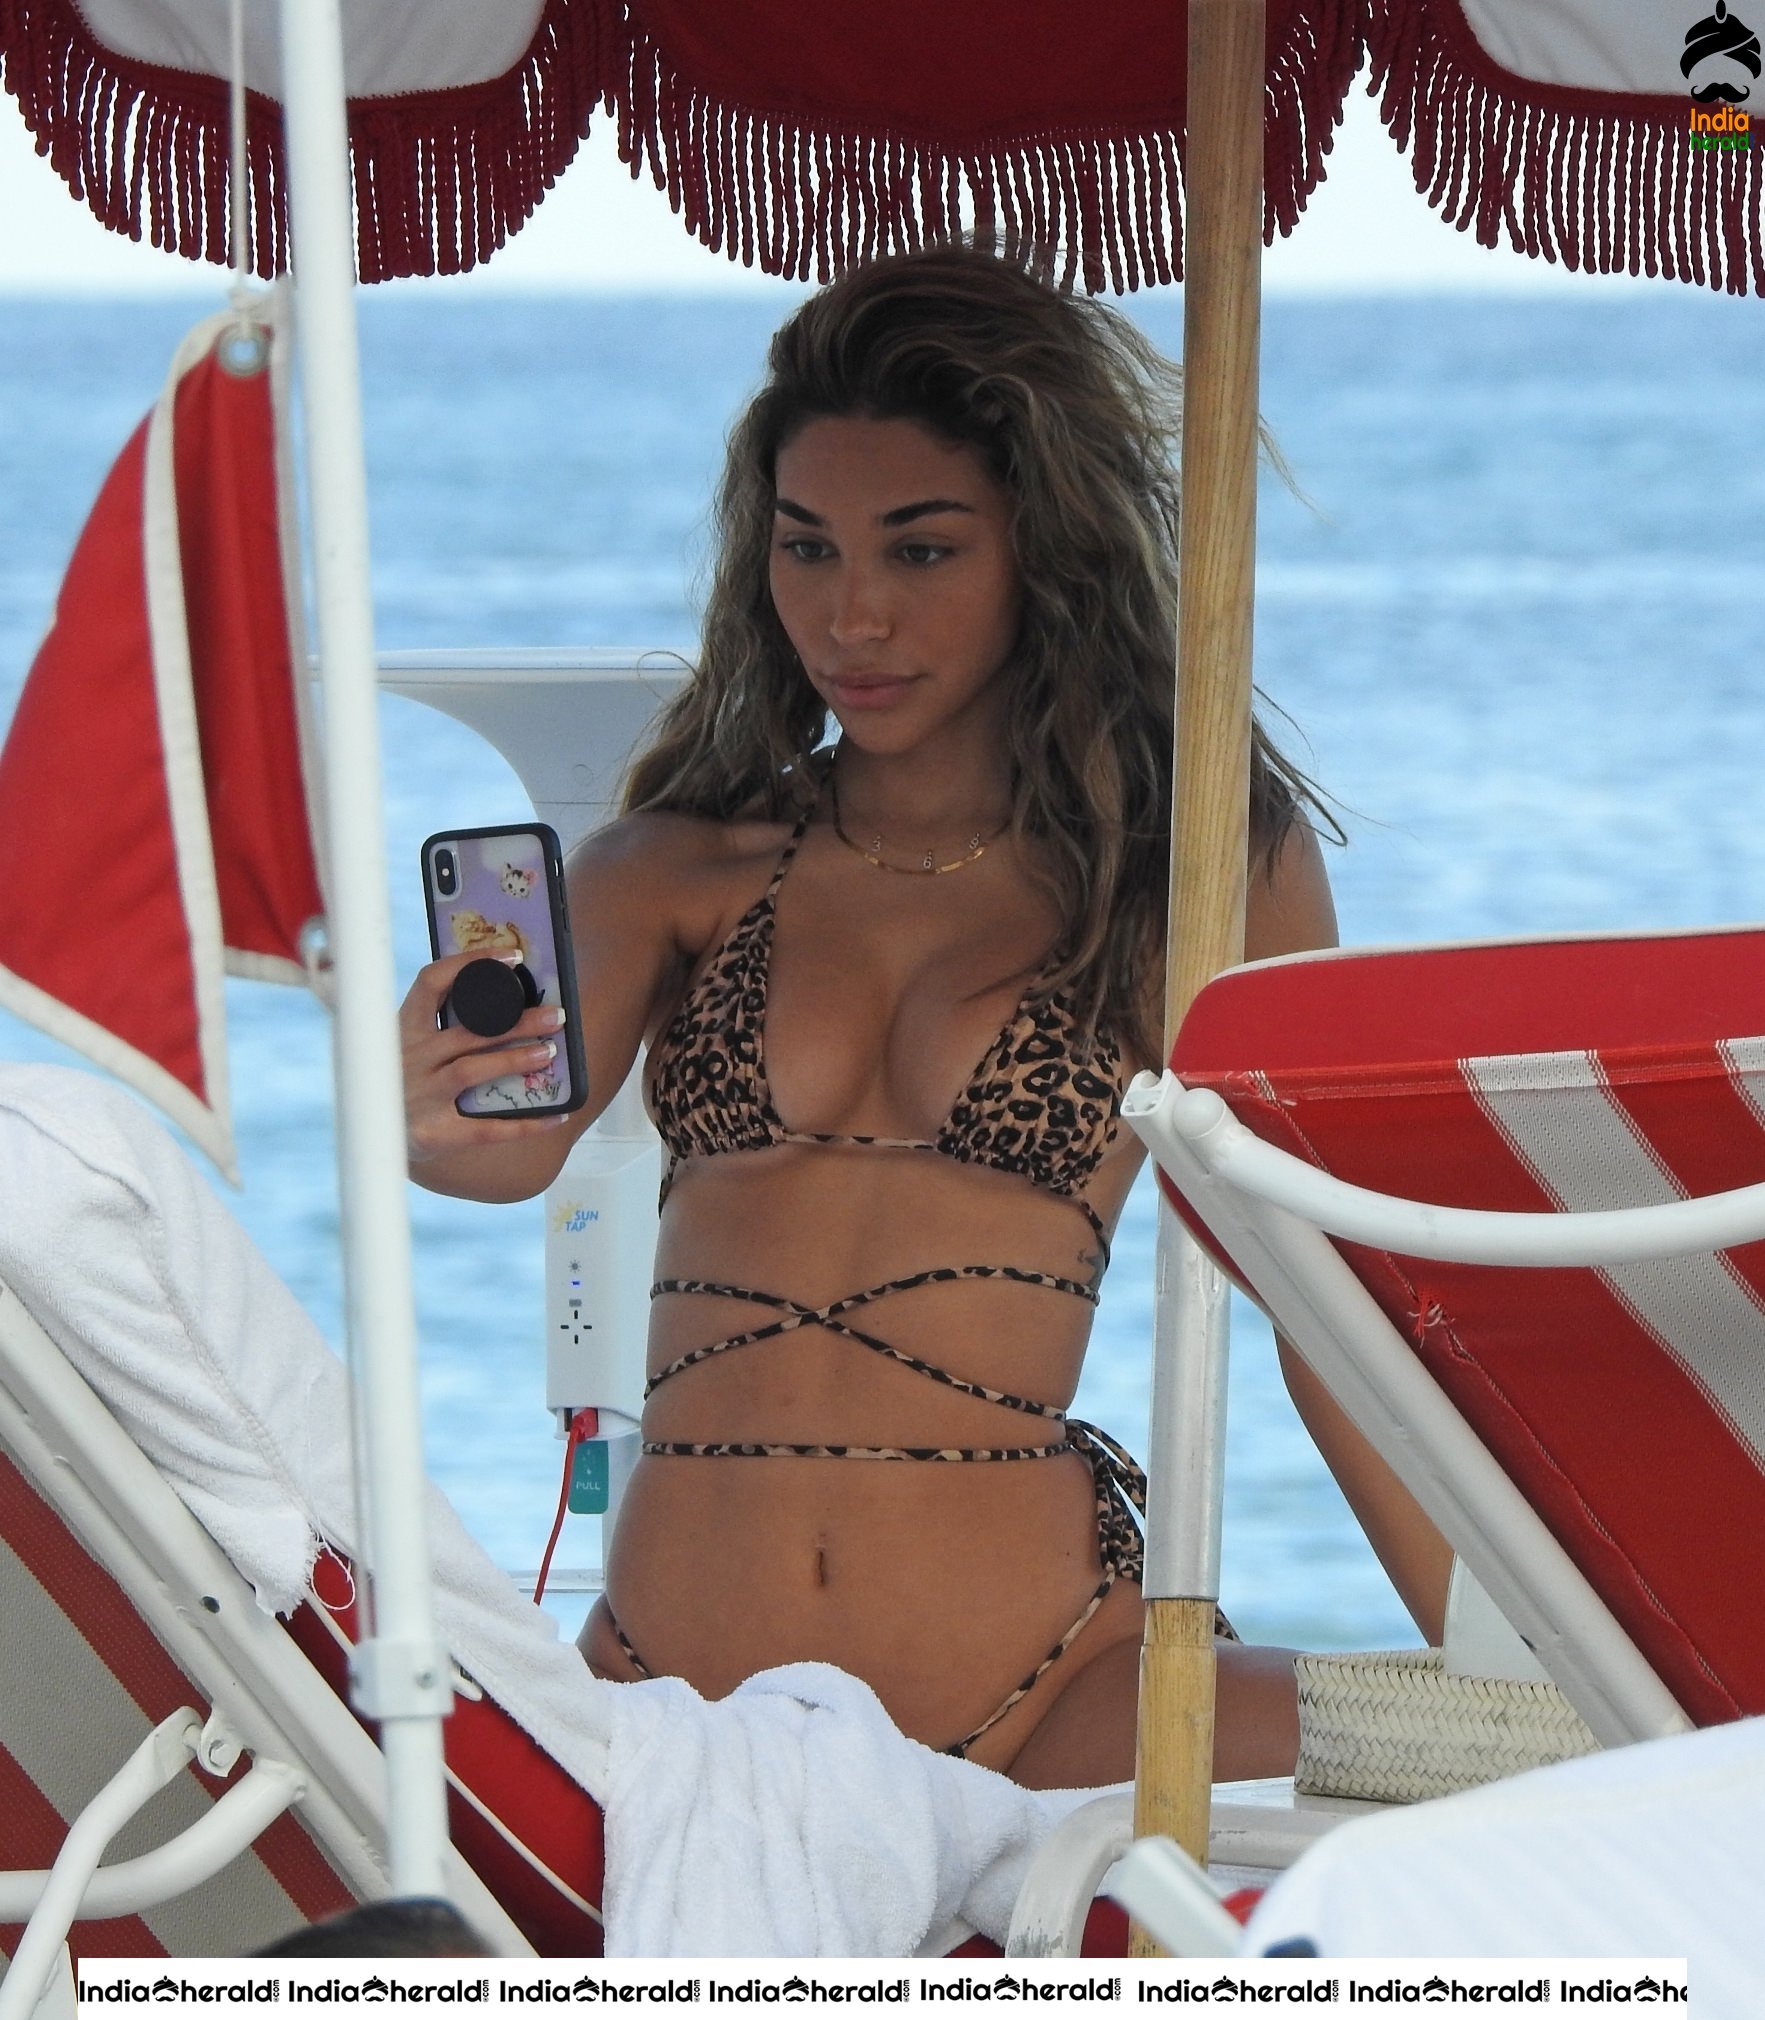 Chantel Jeffries spotted in a sexy lingerie on the beach in Miami